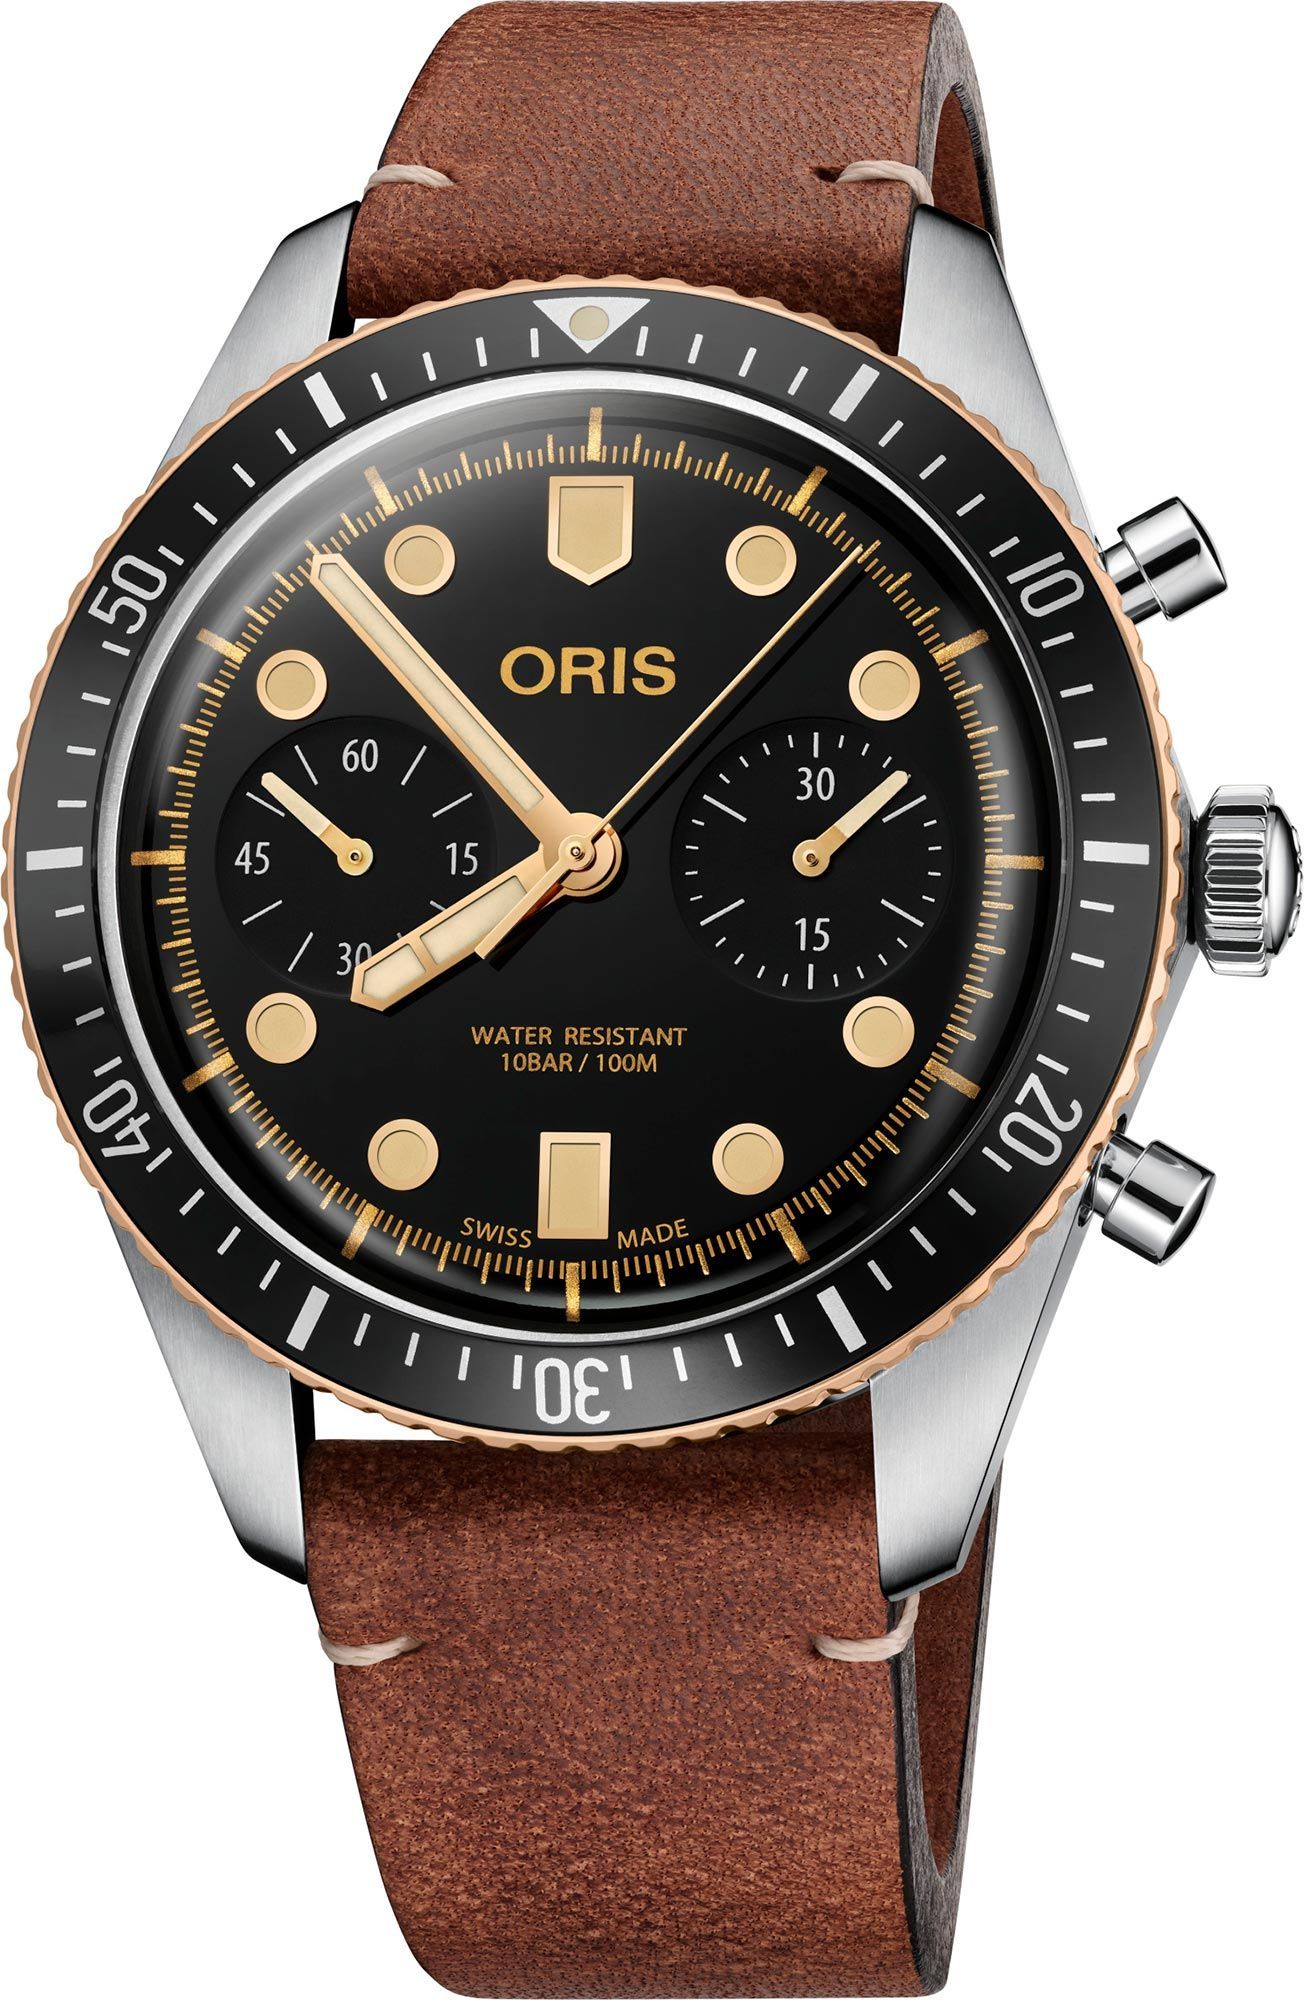 Oris Divers Sixty-Five Chronograph 43 mm Watch in Black Dial For Men - 1